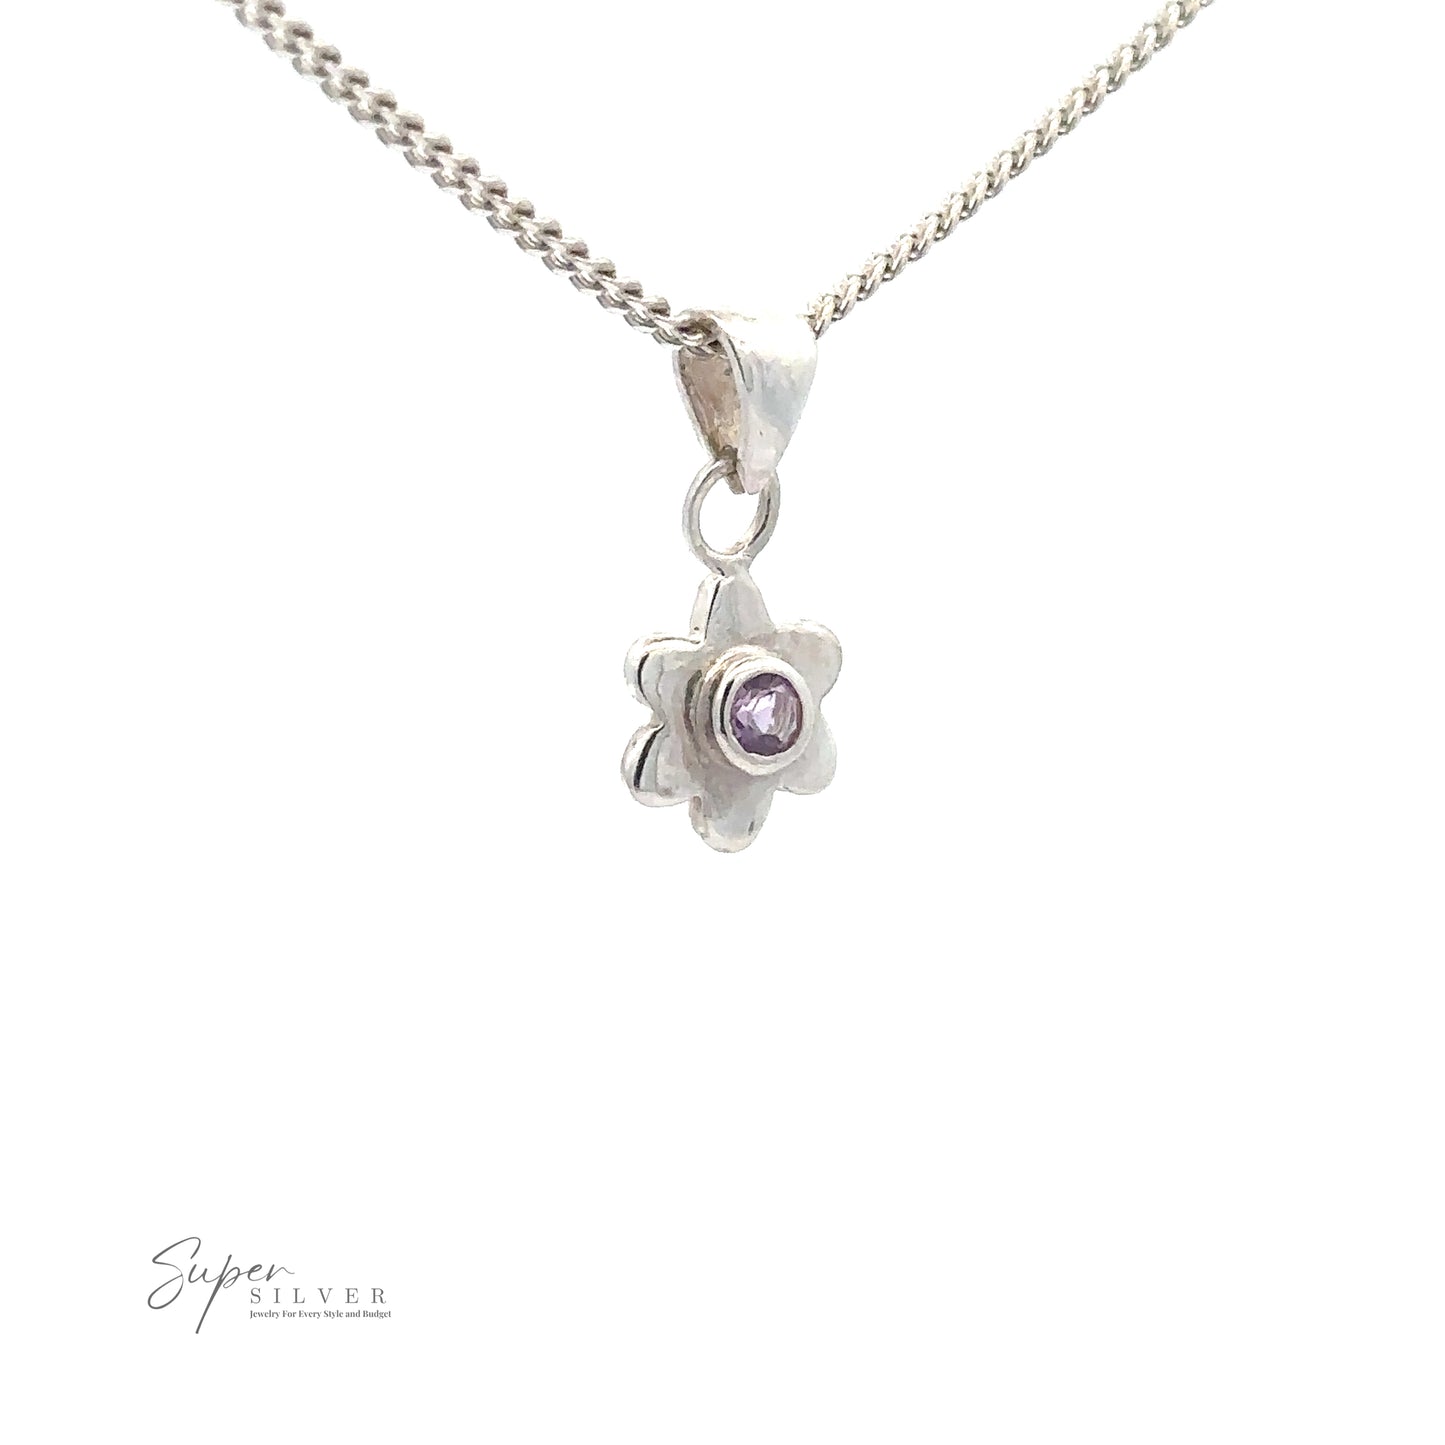 Tiny Gemstone Flower Pendant: Sterling silver necklace with a flower-shaped pendant featuring a small purple gemstone in the center. "Super Silver" logo visible in the bottom left corner.